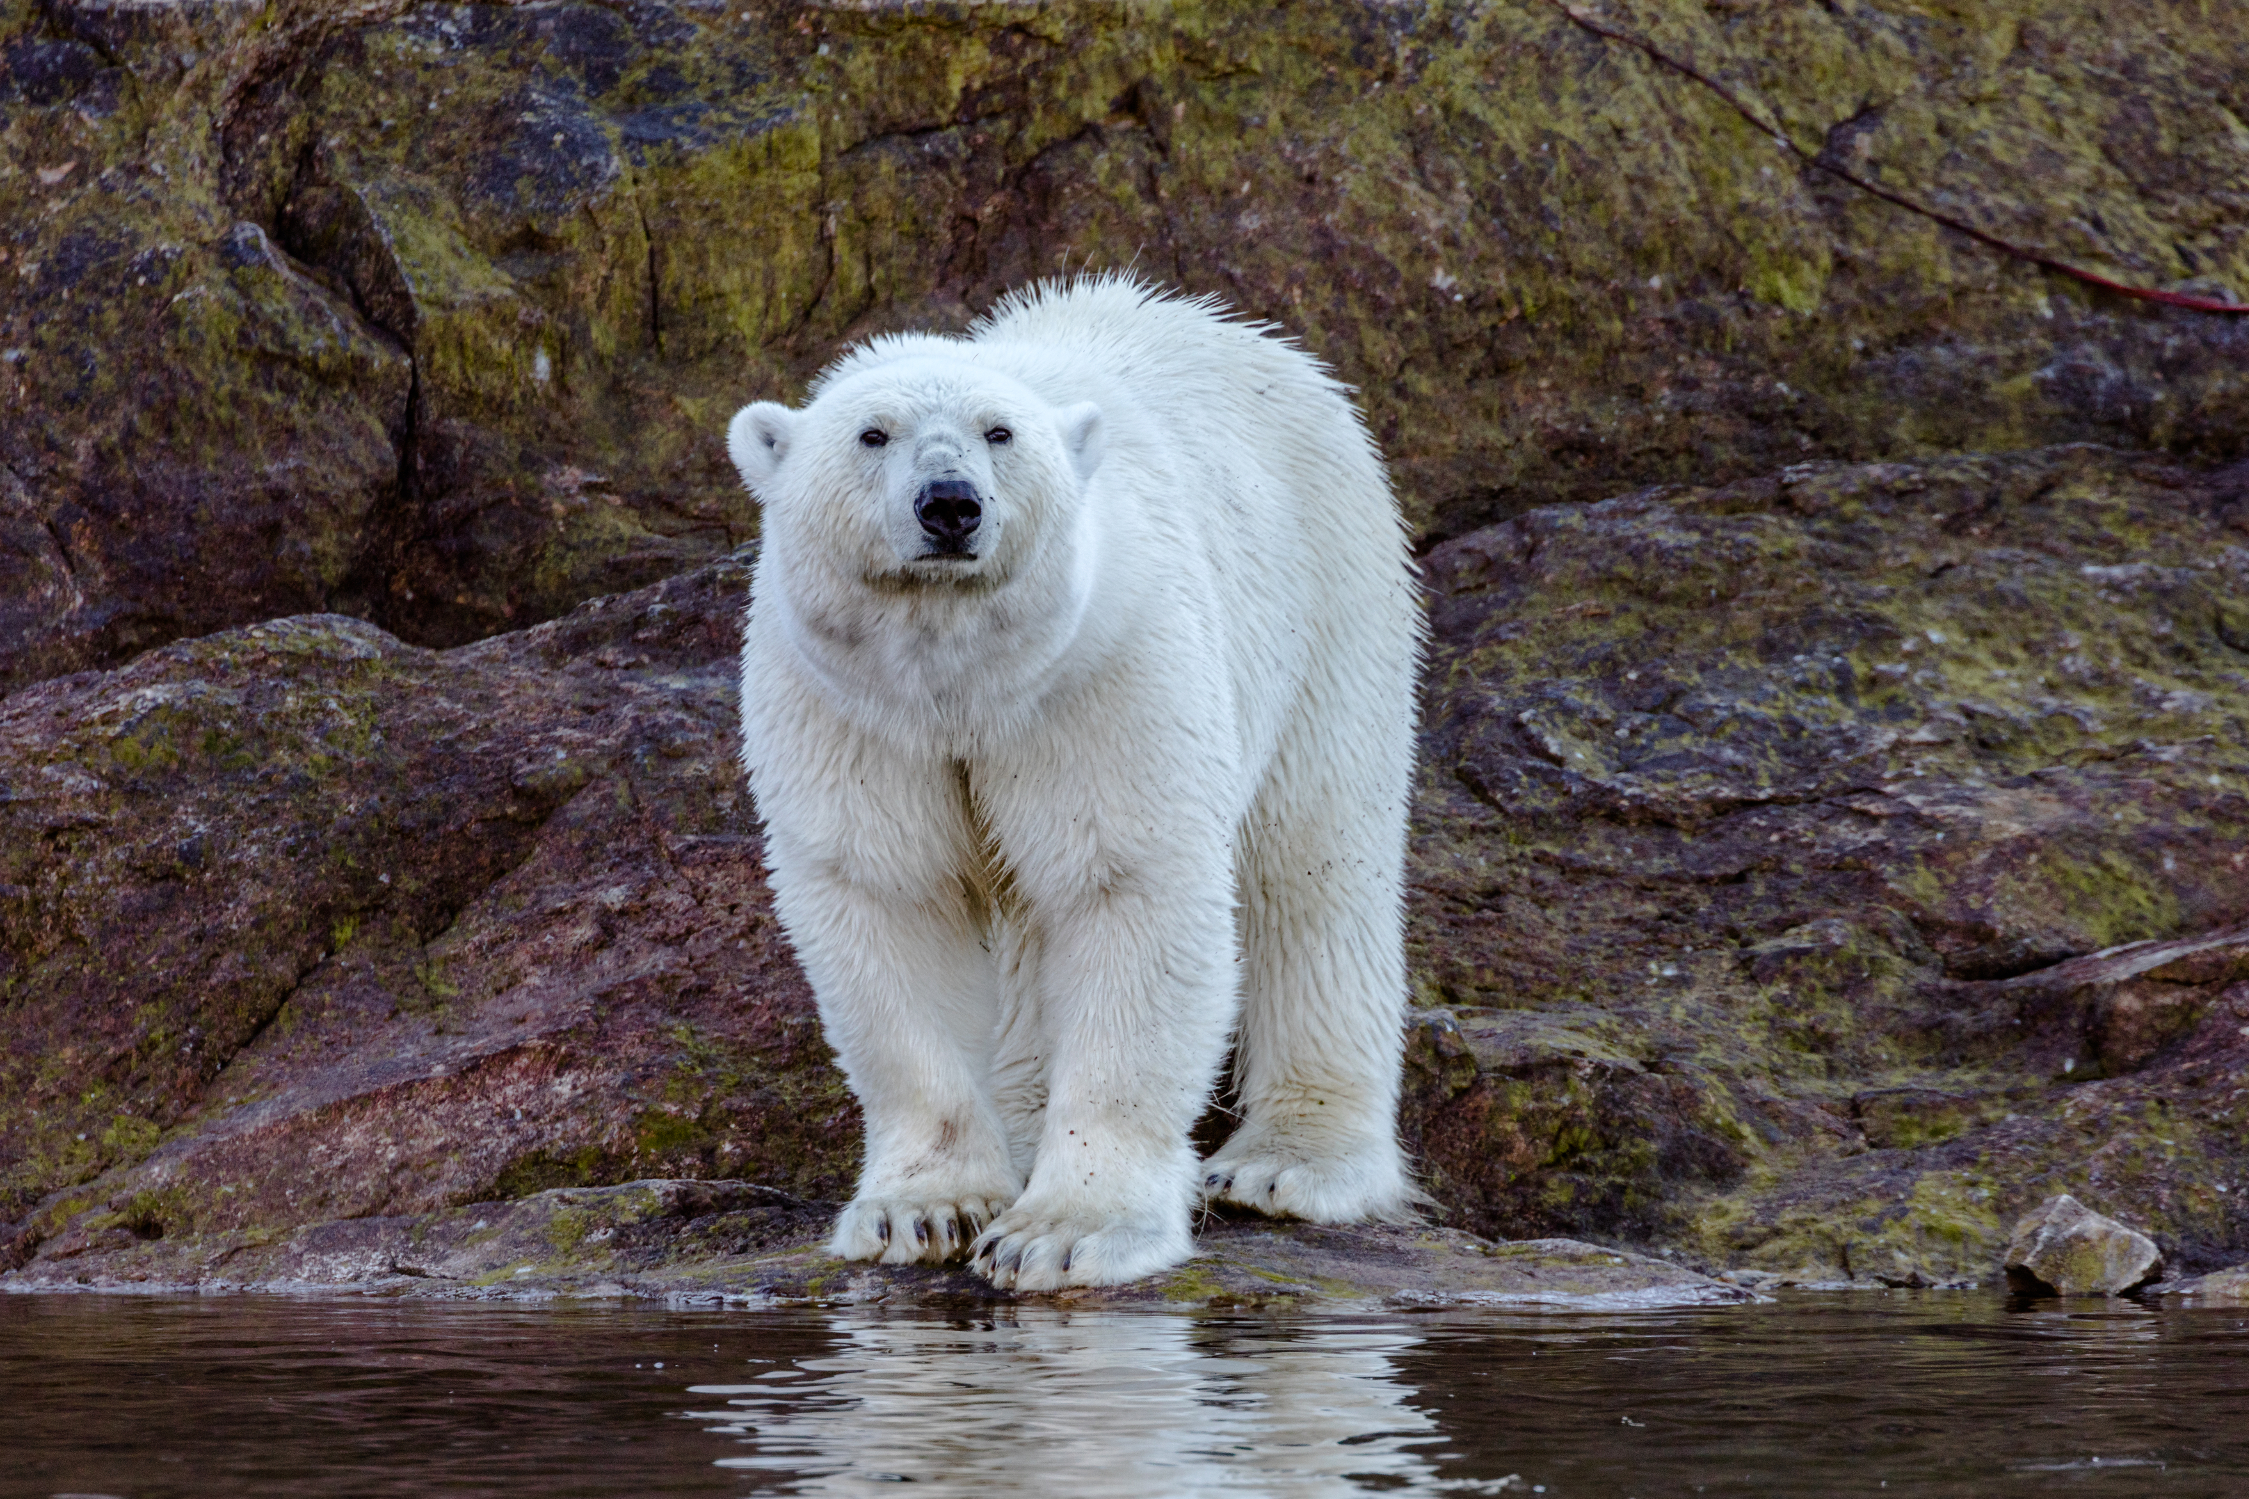 Land-Based Food Not Nutritionally Sufficient for Wild Polar Bears,  According to New Study | San Diego Zoo Wildlife Alliance